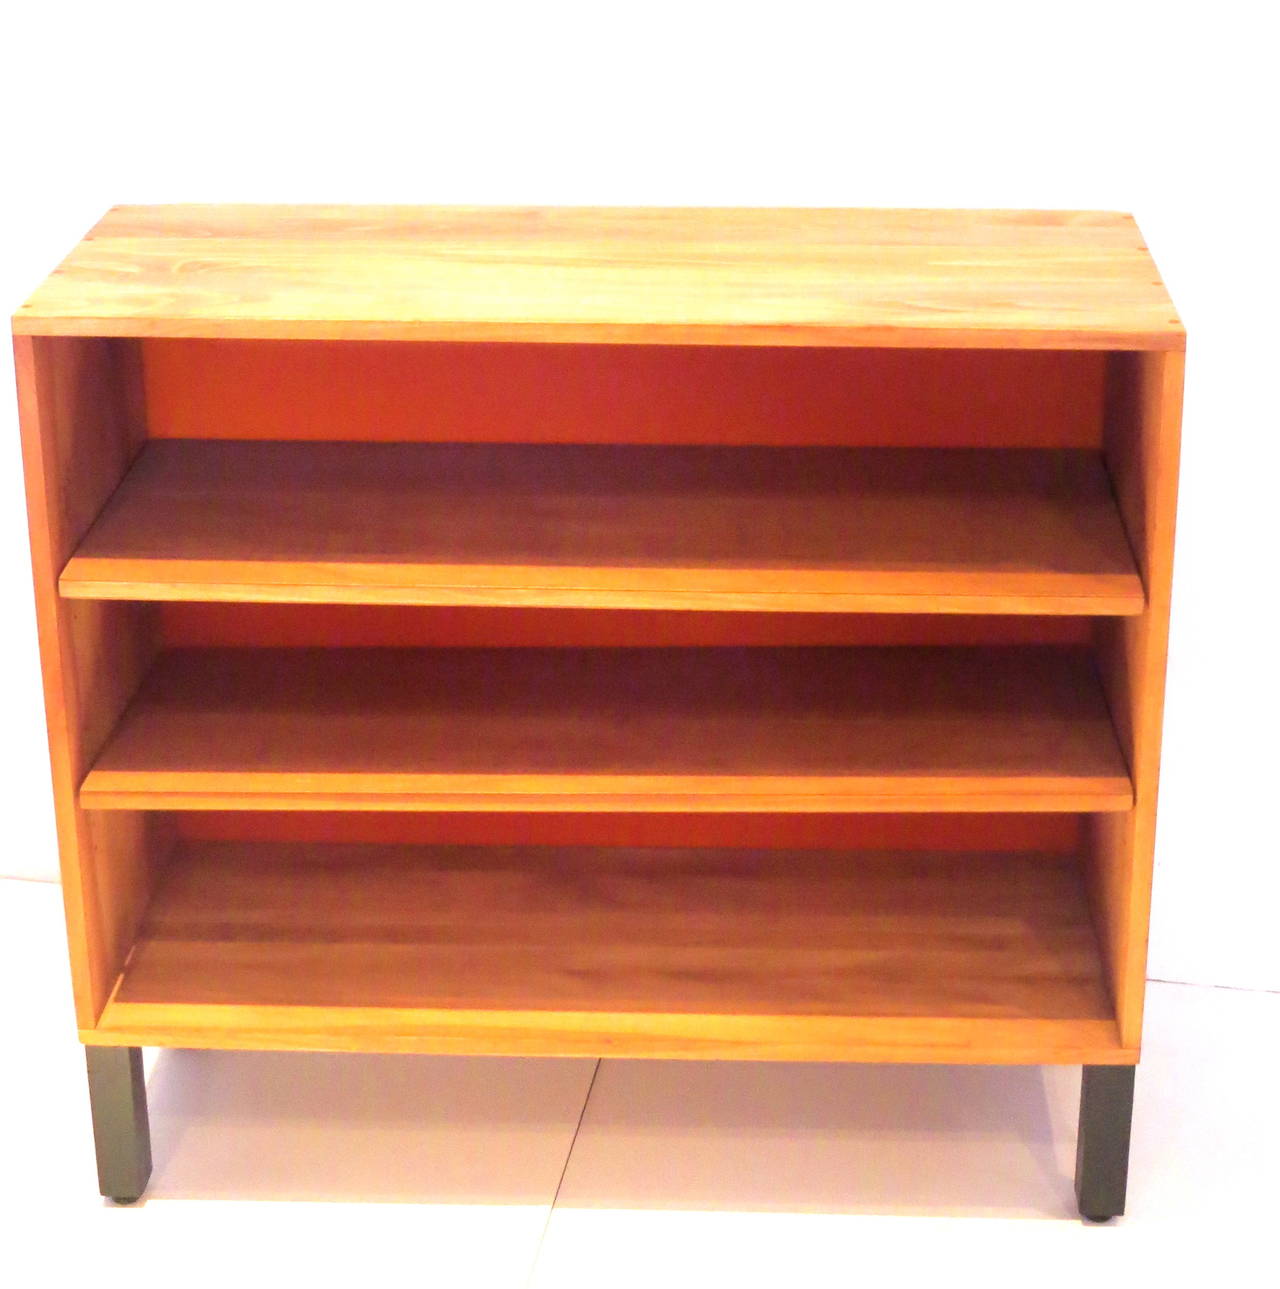 Mid-Century Modern American Modern 1950s  solid ash wood book caze with orange back.